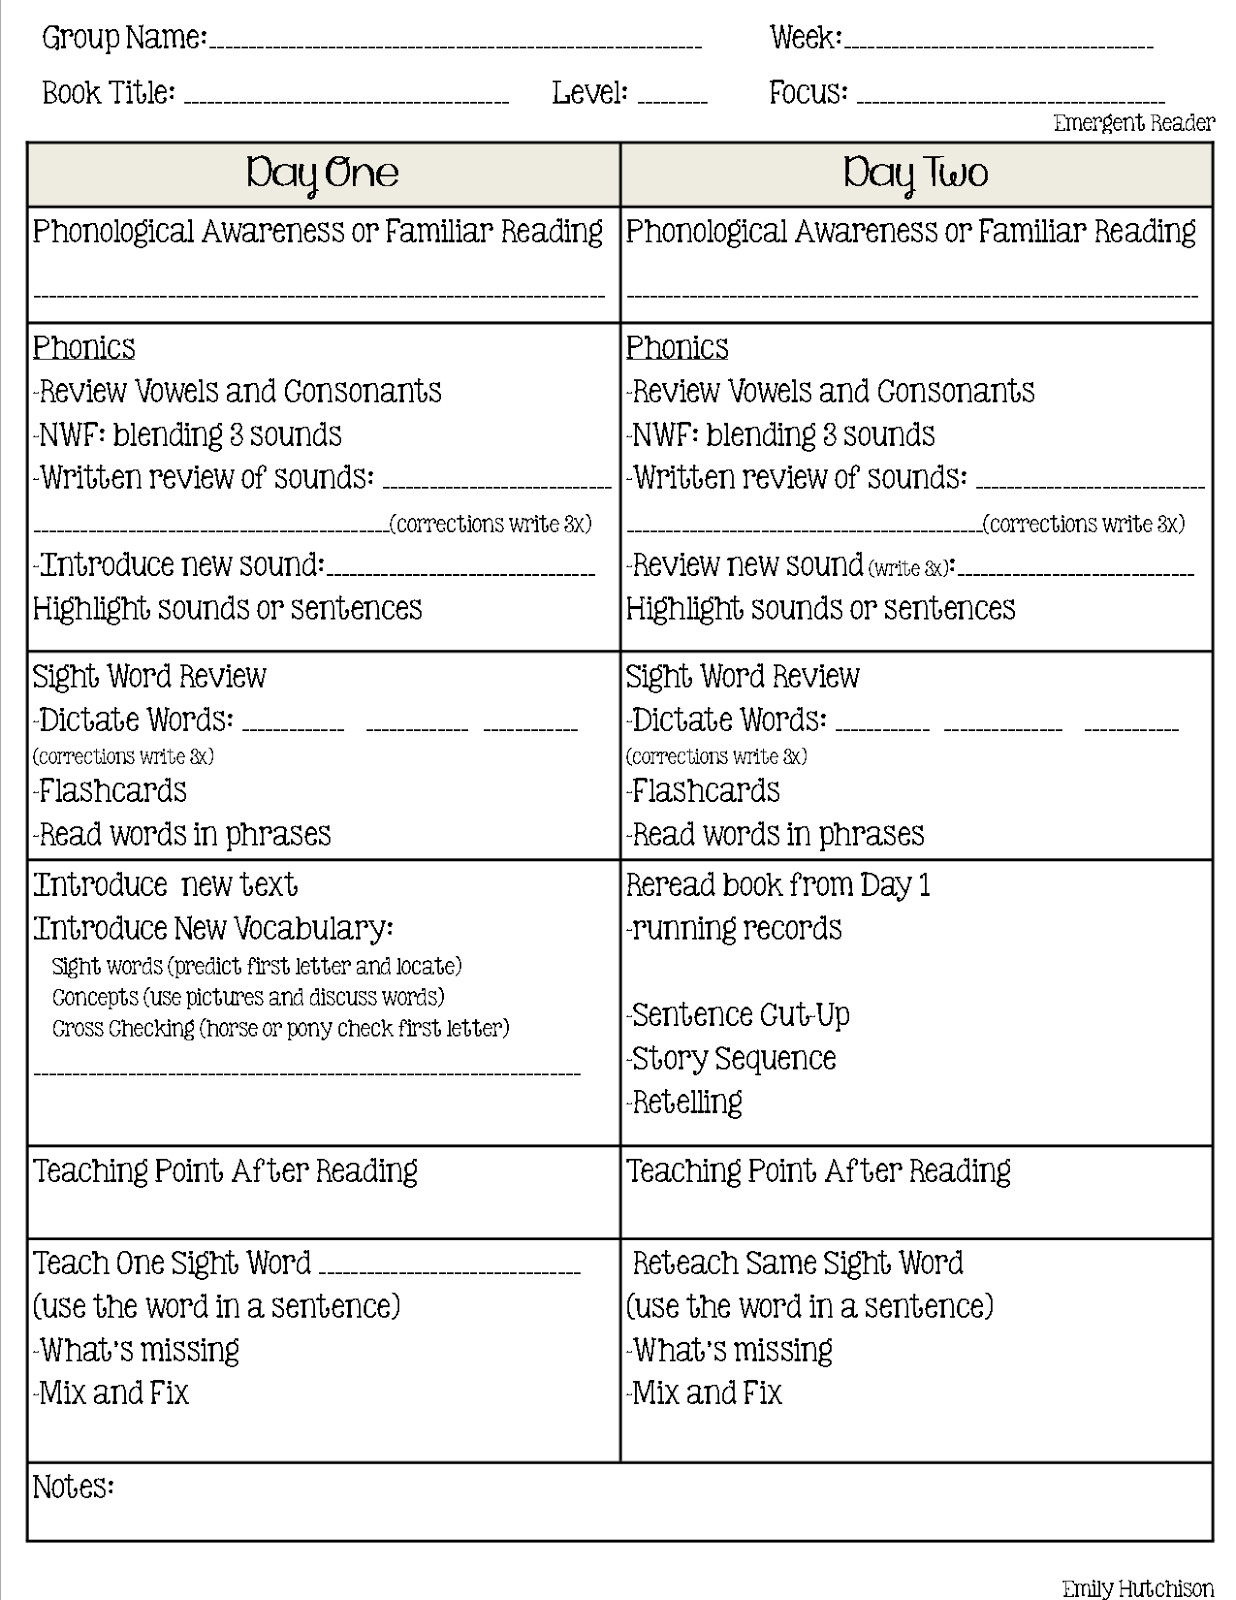 Guided Reading Lesson Plans Curious Firsties Guided Reading format A Second Look